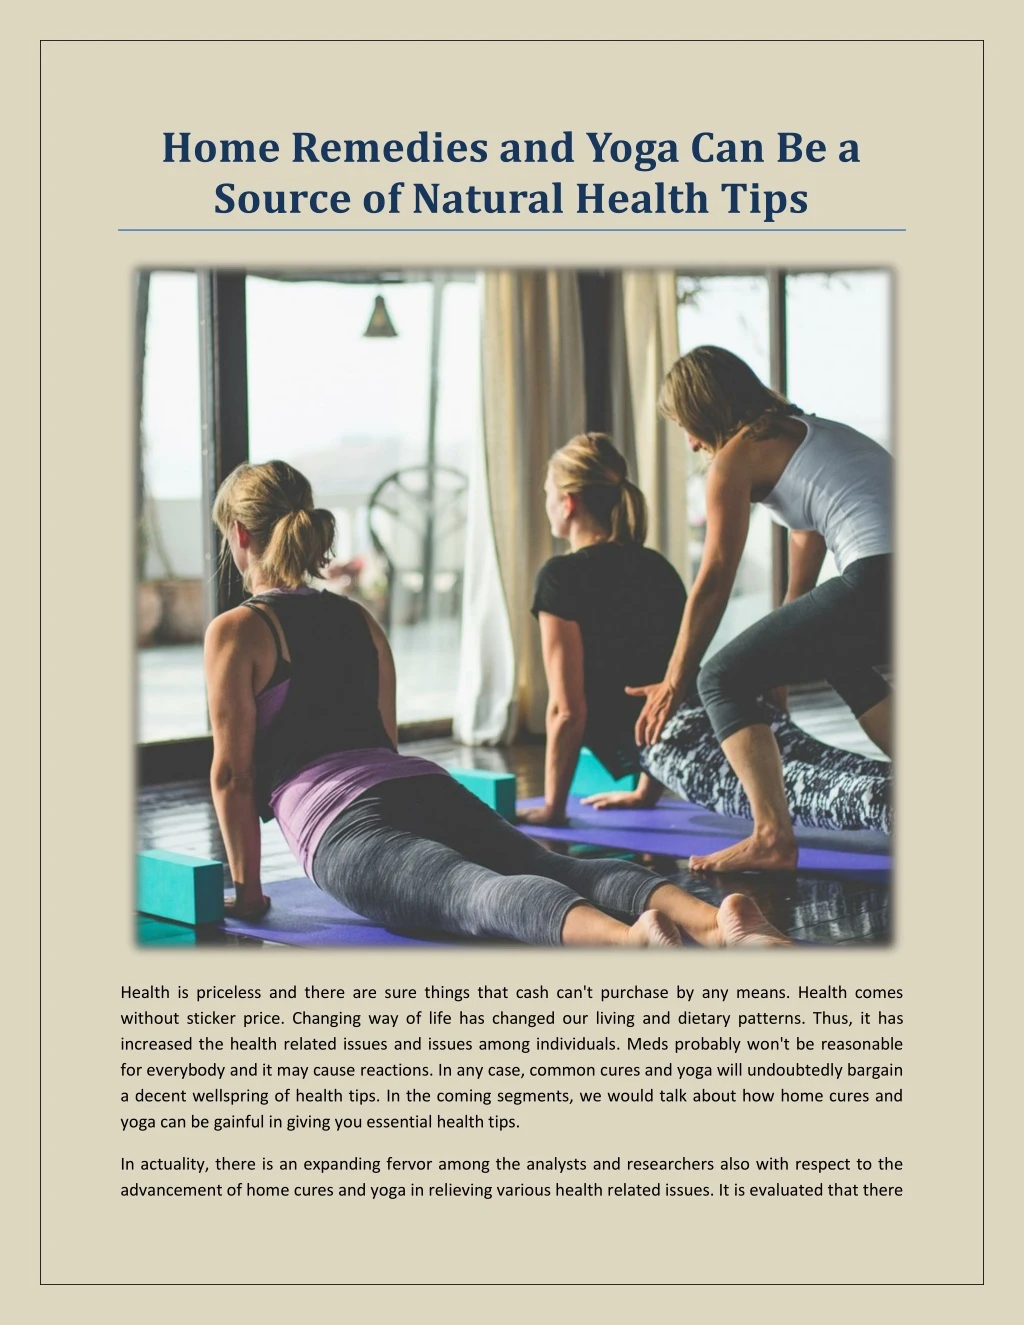 home remedies and yoga can be a source of natural